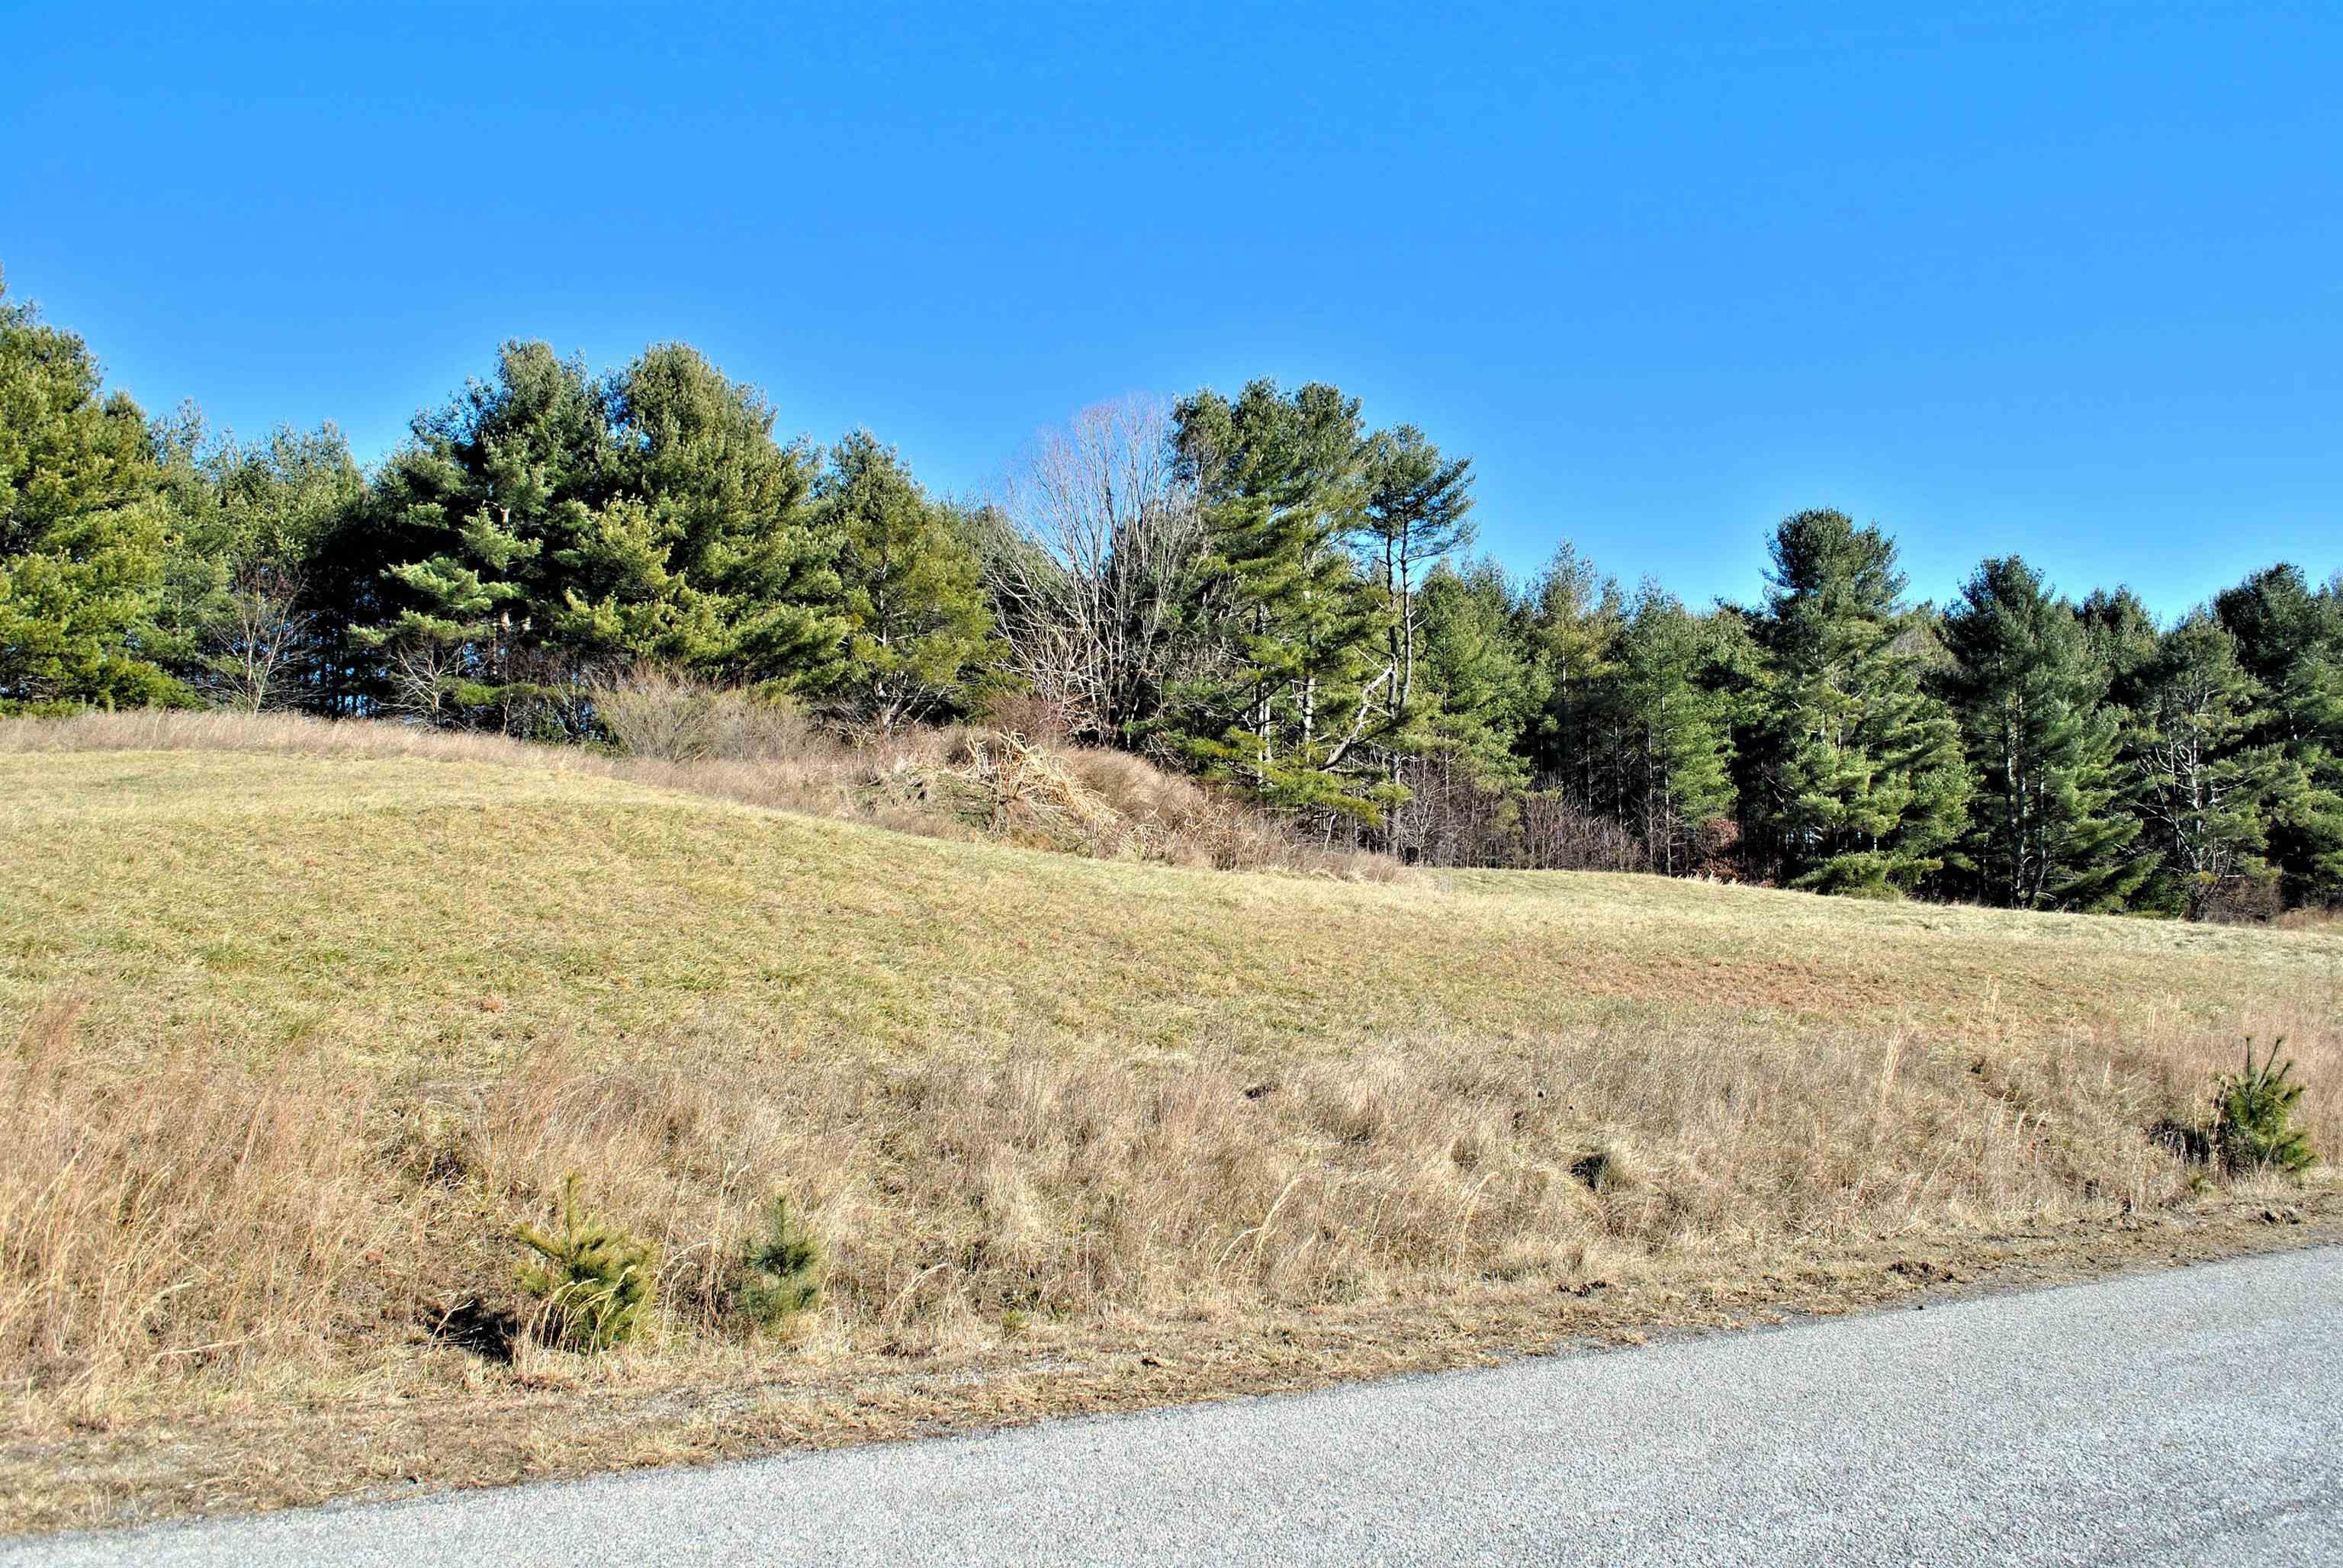 Build your dream on this open lot with great mountain views near the end of a cul-de-sac!  Property has High Speed Internet available with Fiber Optic Cable at the property so you can work from home!  The property has perk test completed for a 3 bedroom home.  Conveniently located within 15 to 20 minutes to I-81, Christiansburg, Blacksburg, VT, Radford, RU, Carilion Hospital, Montgomery Regional Hospital, etc... Country living at is finest!  Call for a private showing!